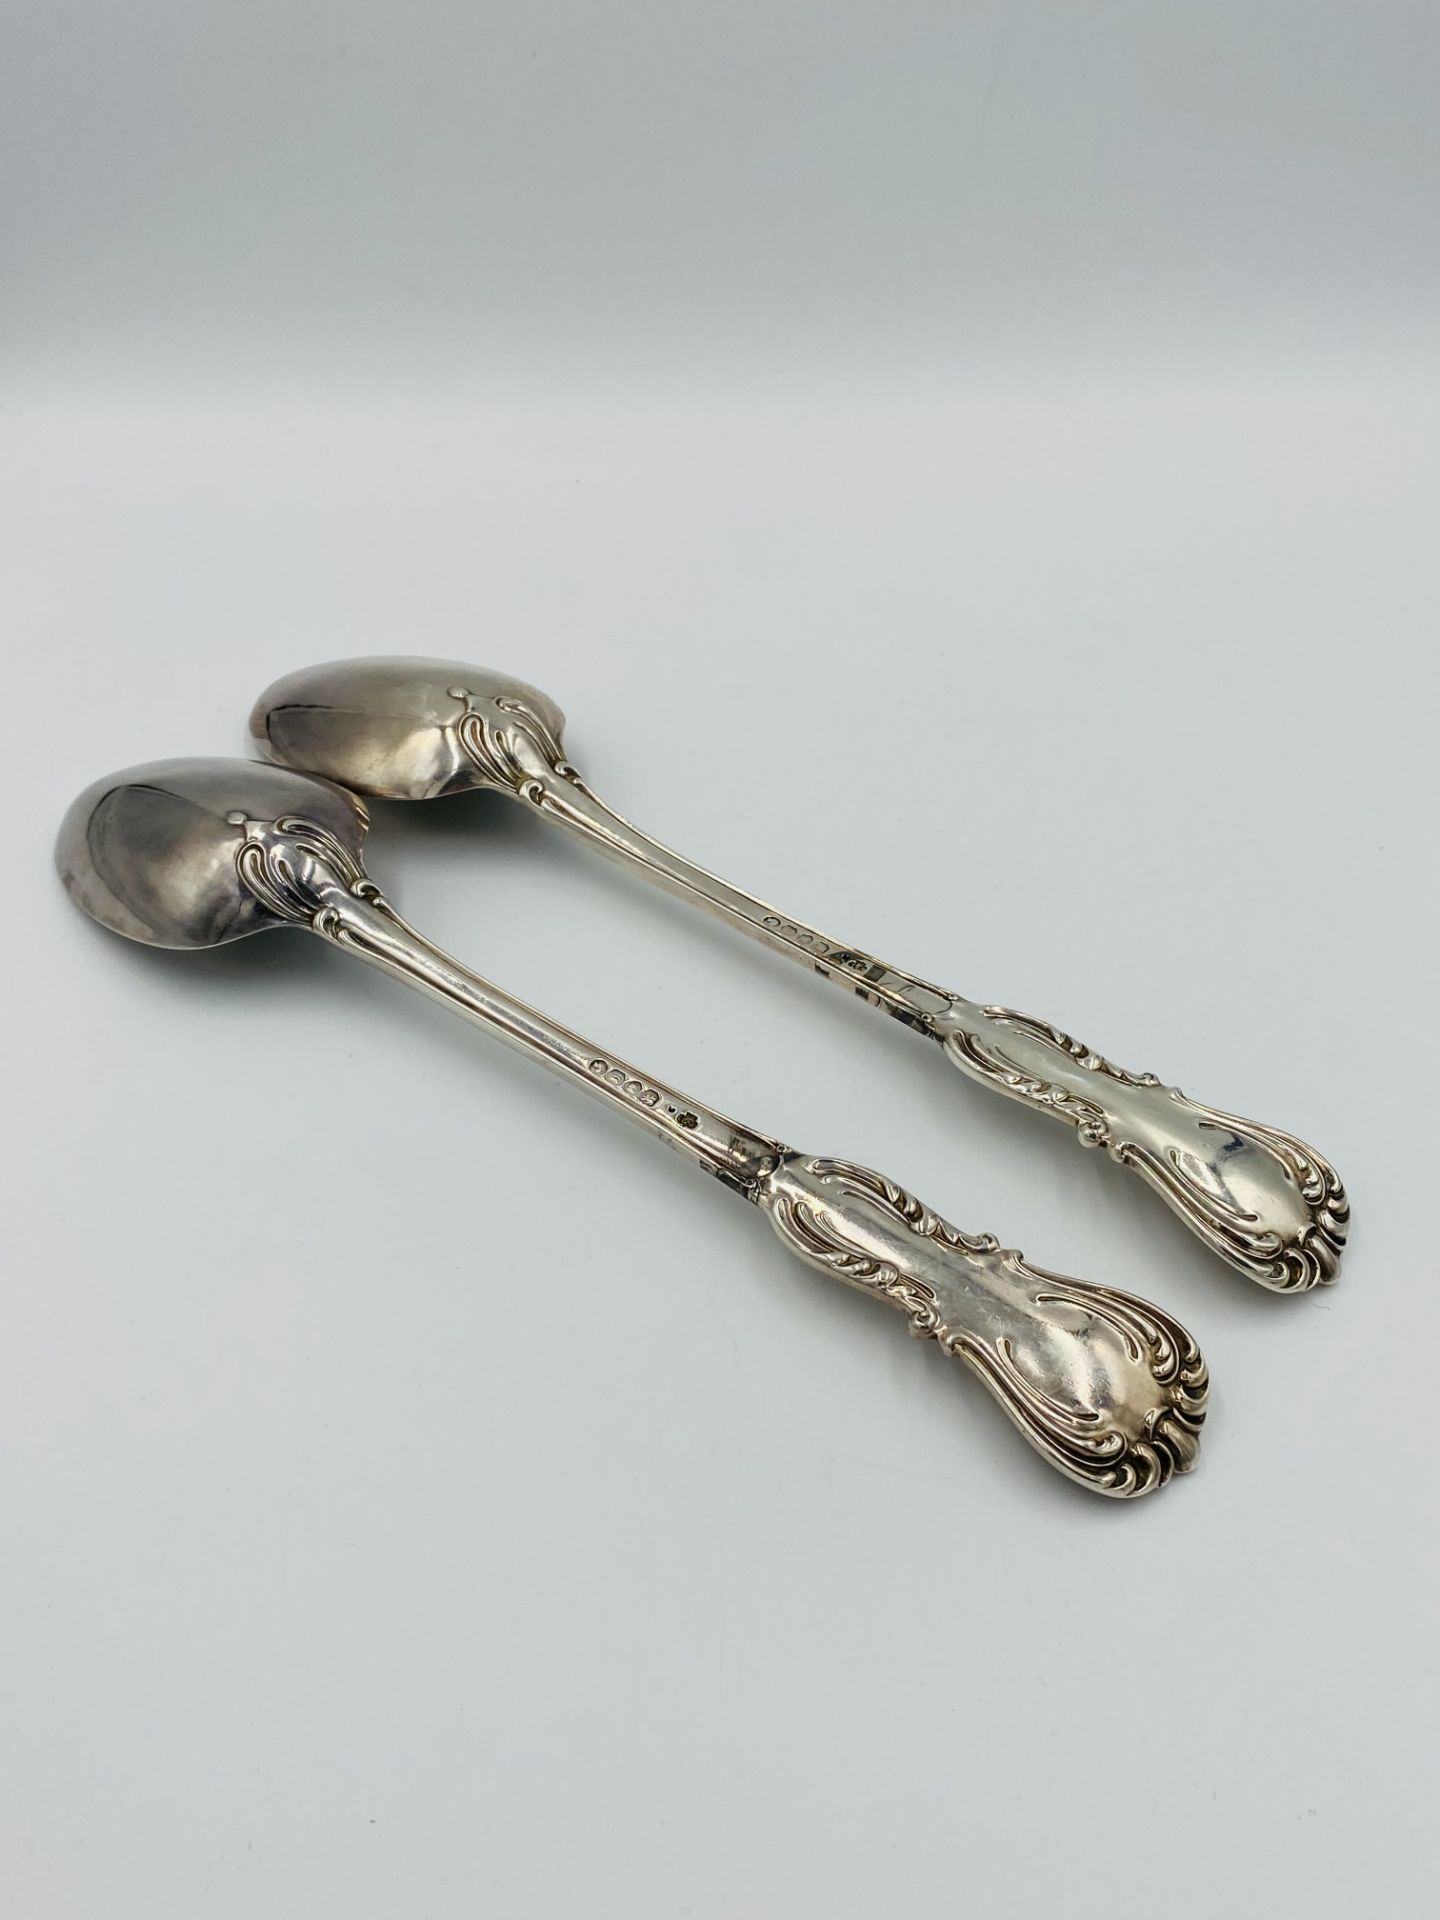 Two silver serving spoons - Image 4 of 5